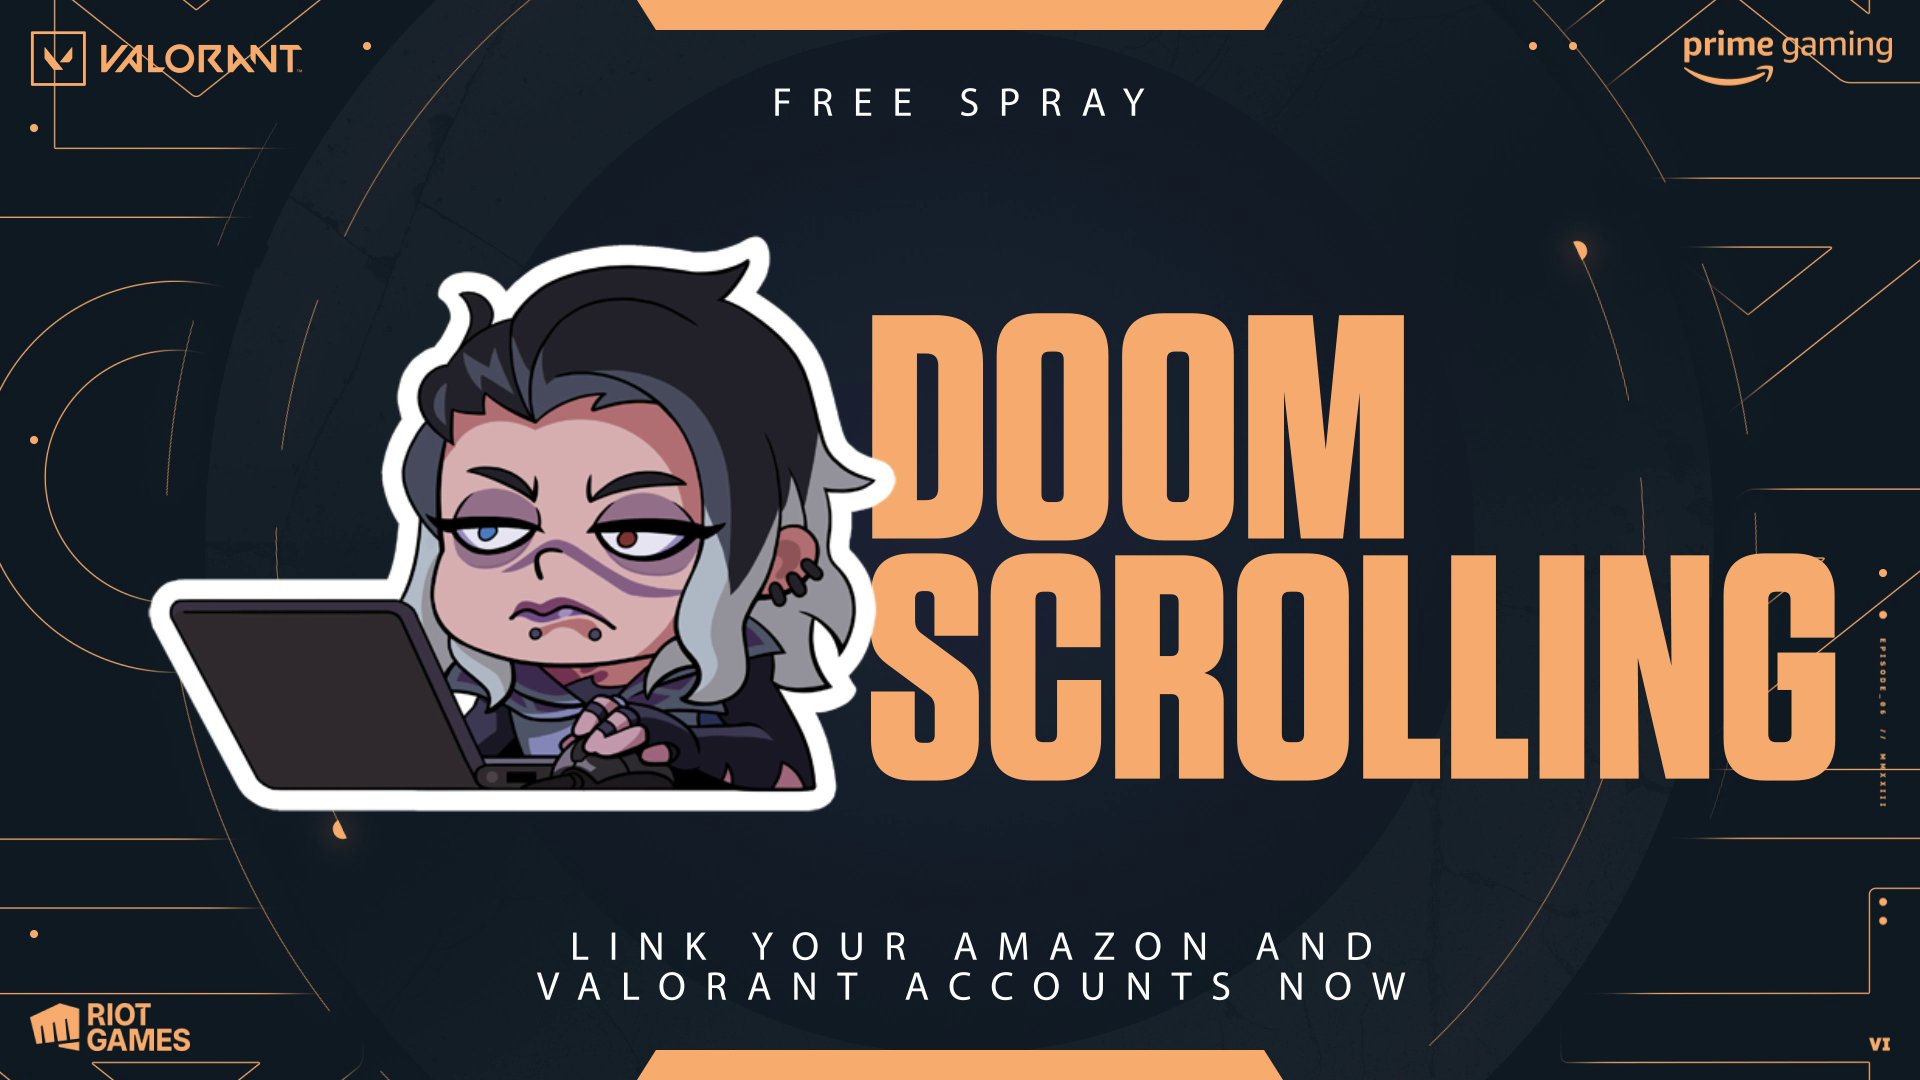 Clip it Spray for Valorant FREE with Prime Gaming!  We got the perfect  Spray for any streamer playing VALORANT, the exclusive Clip It Spray 🎬👑  Claim the spray, execute the perfect